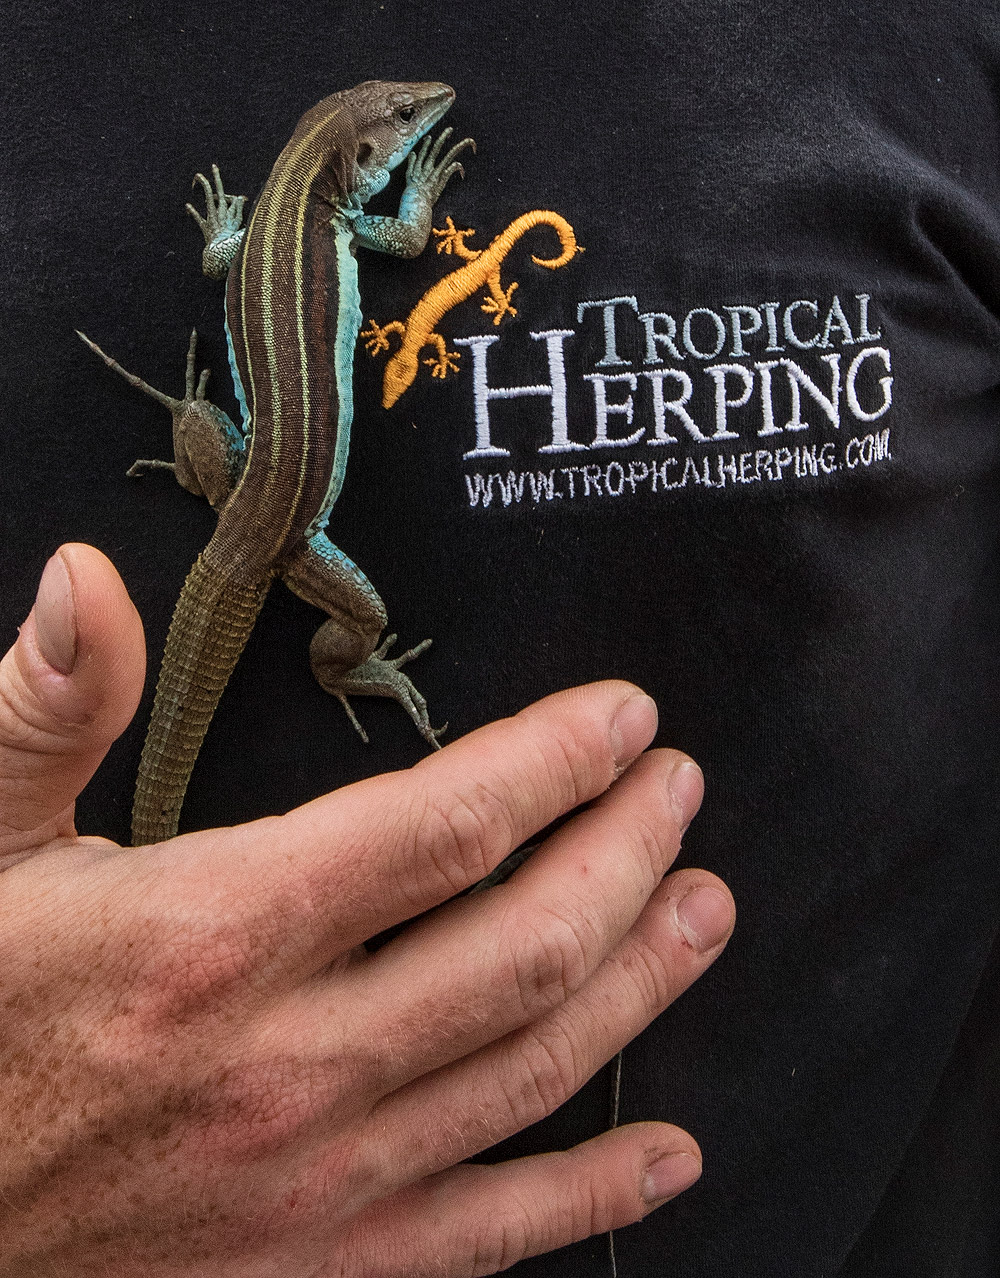 An Orcés’ Blue Whiptail held besides the logo of Tropical Herping